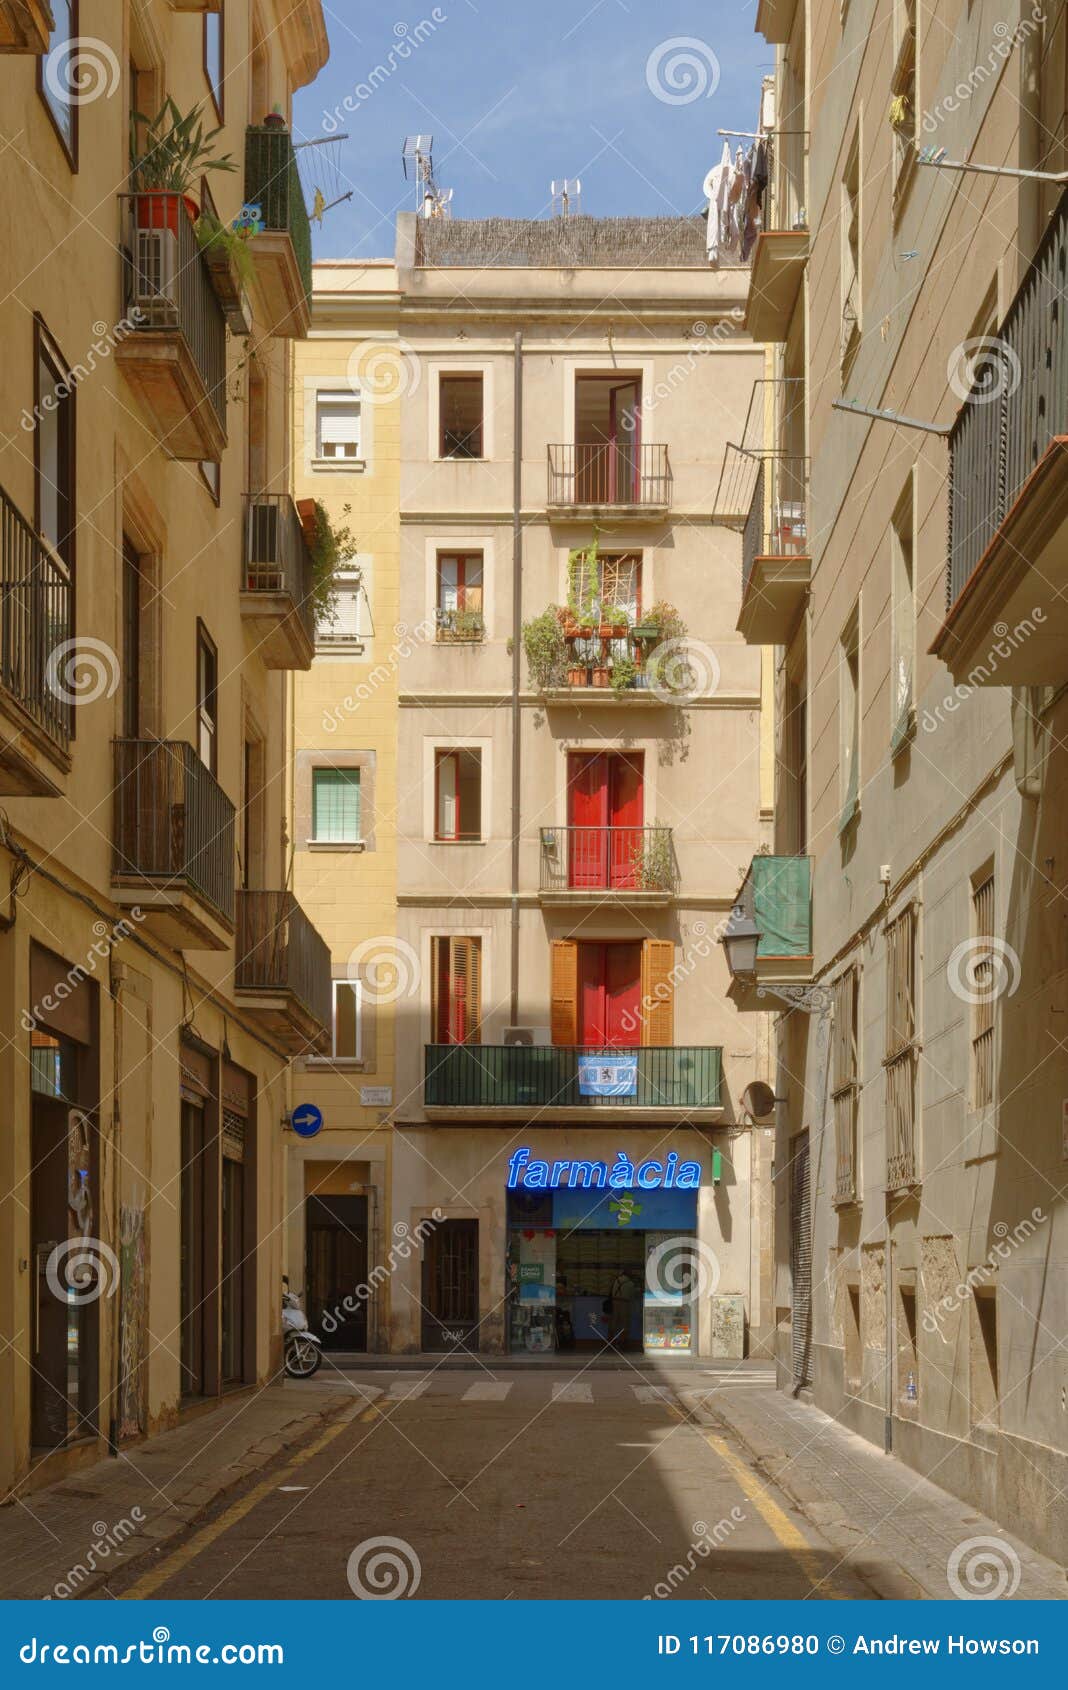 Typical Barcelona City Side Street, Spain Editorial Image - Image of ...